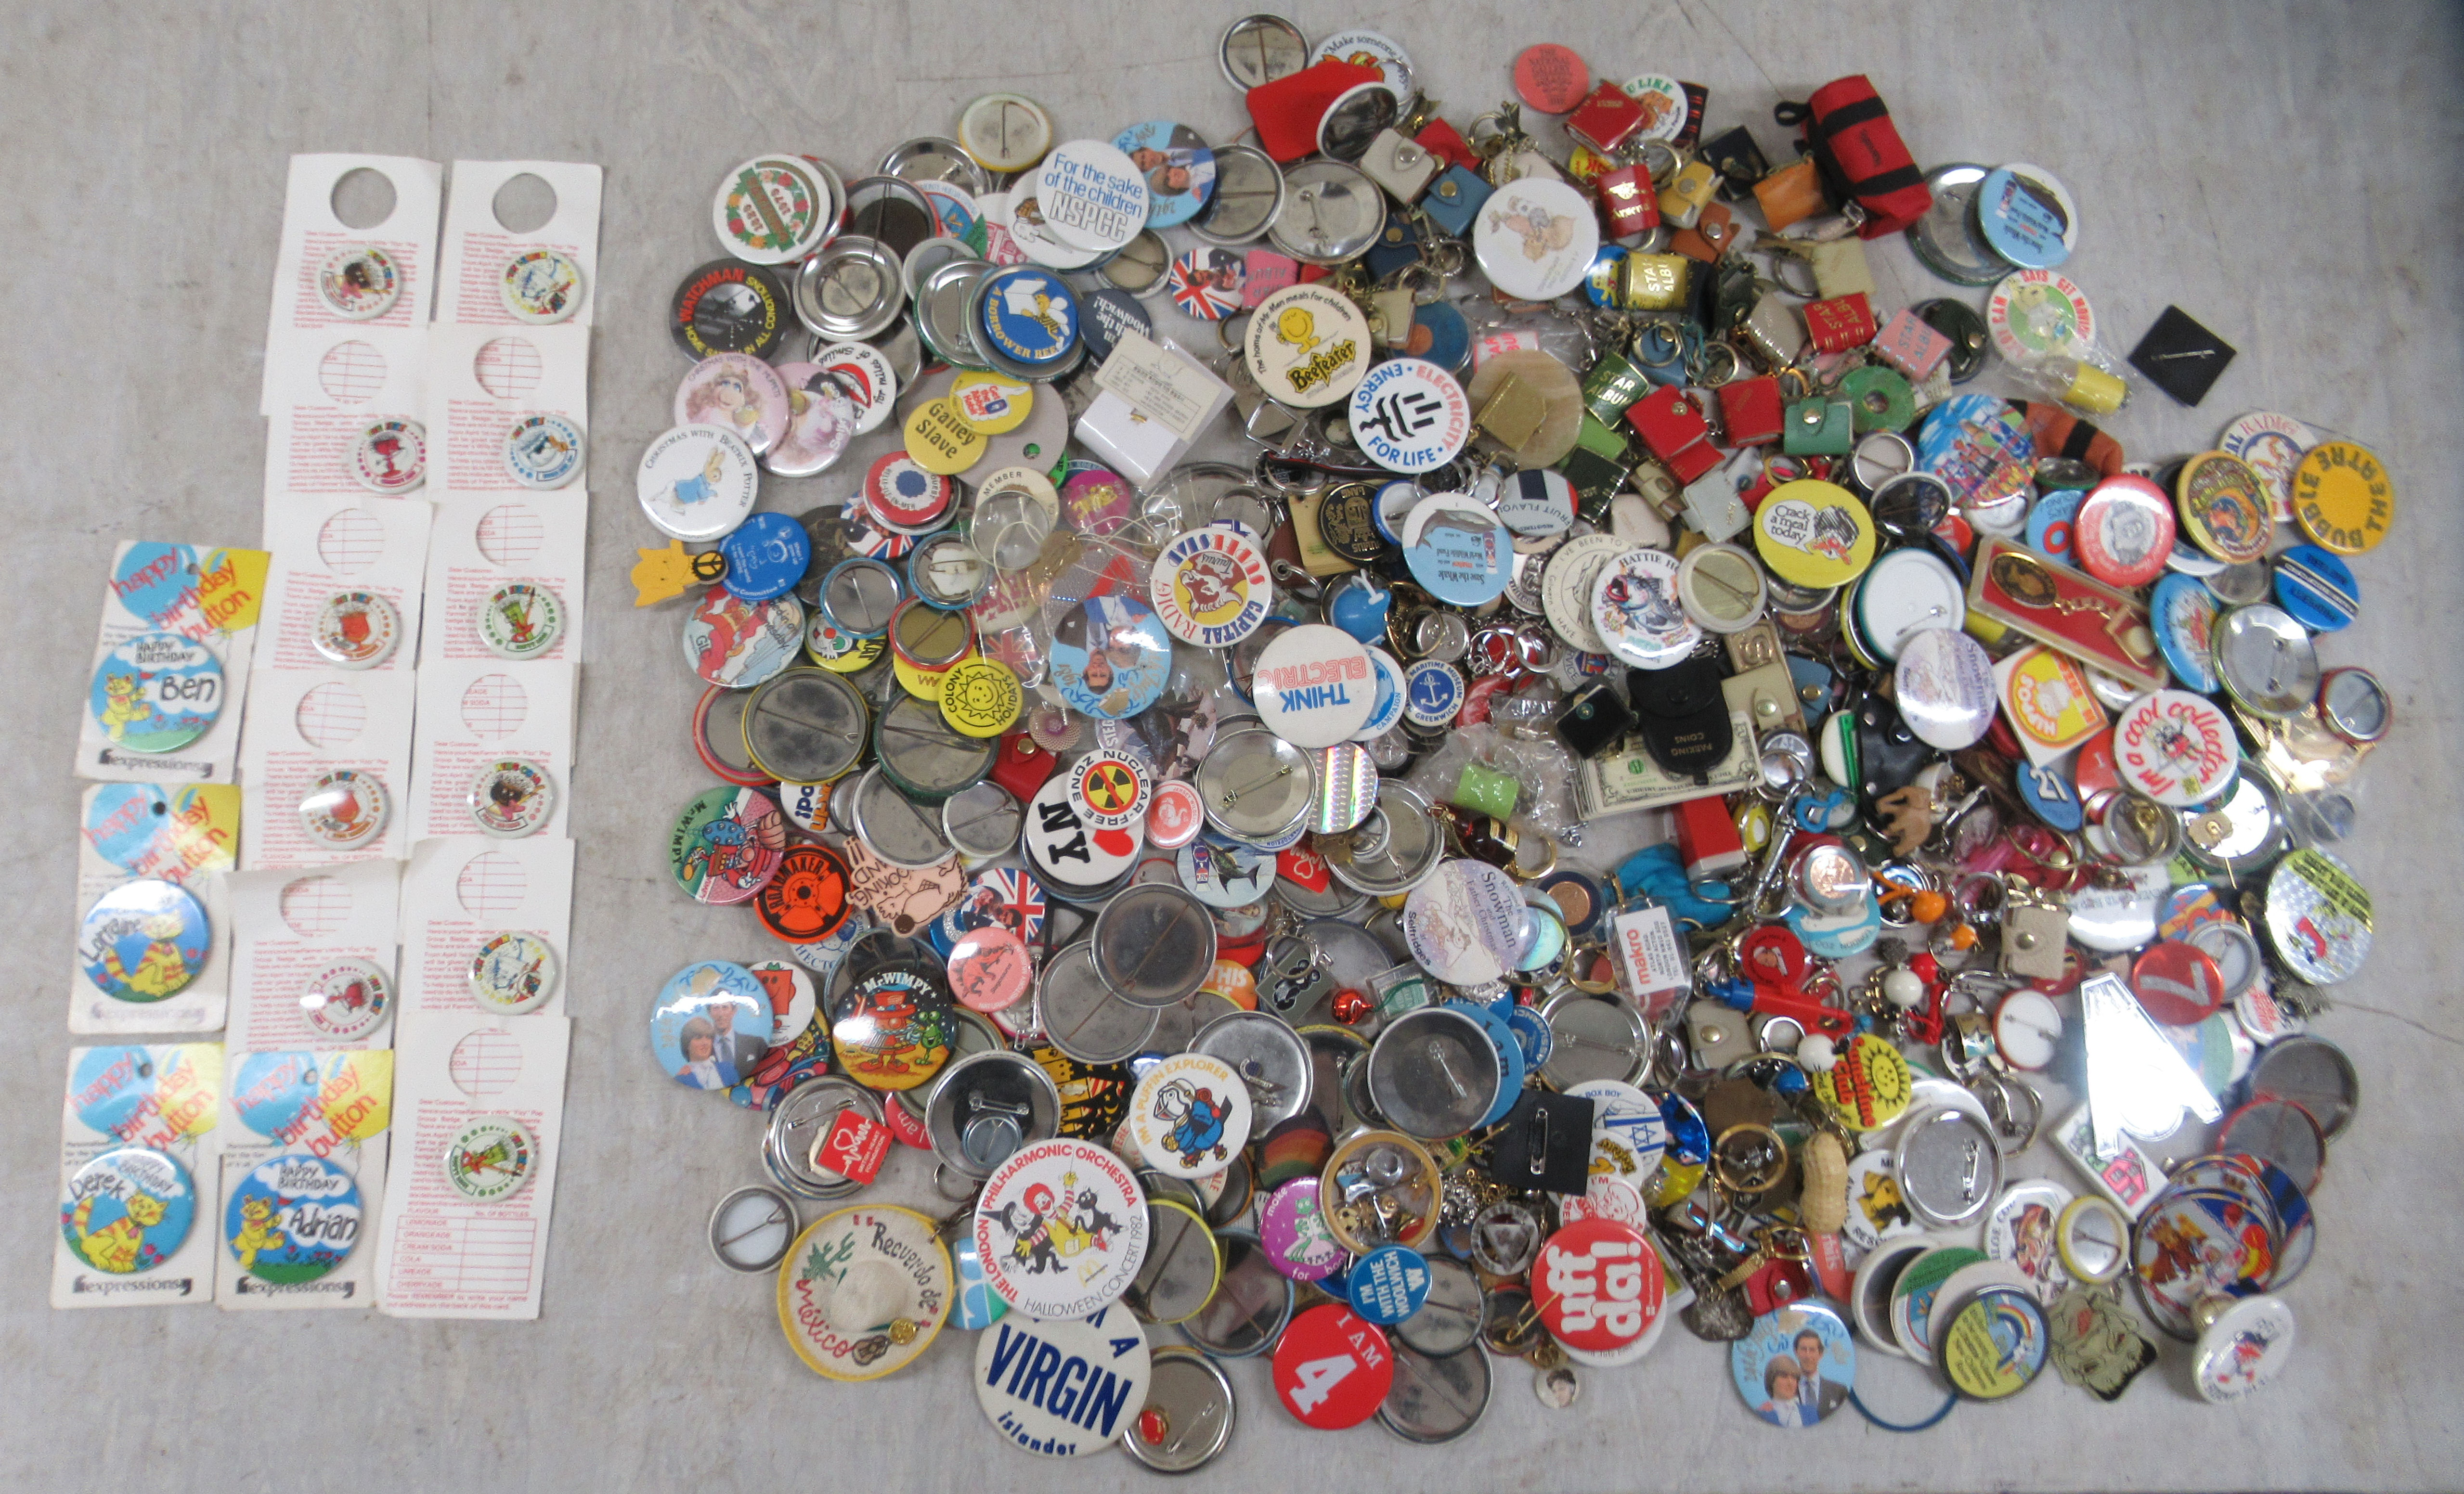 A collection of variously themed badges and keyrings